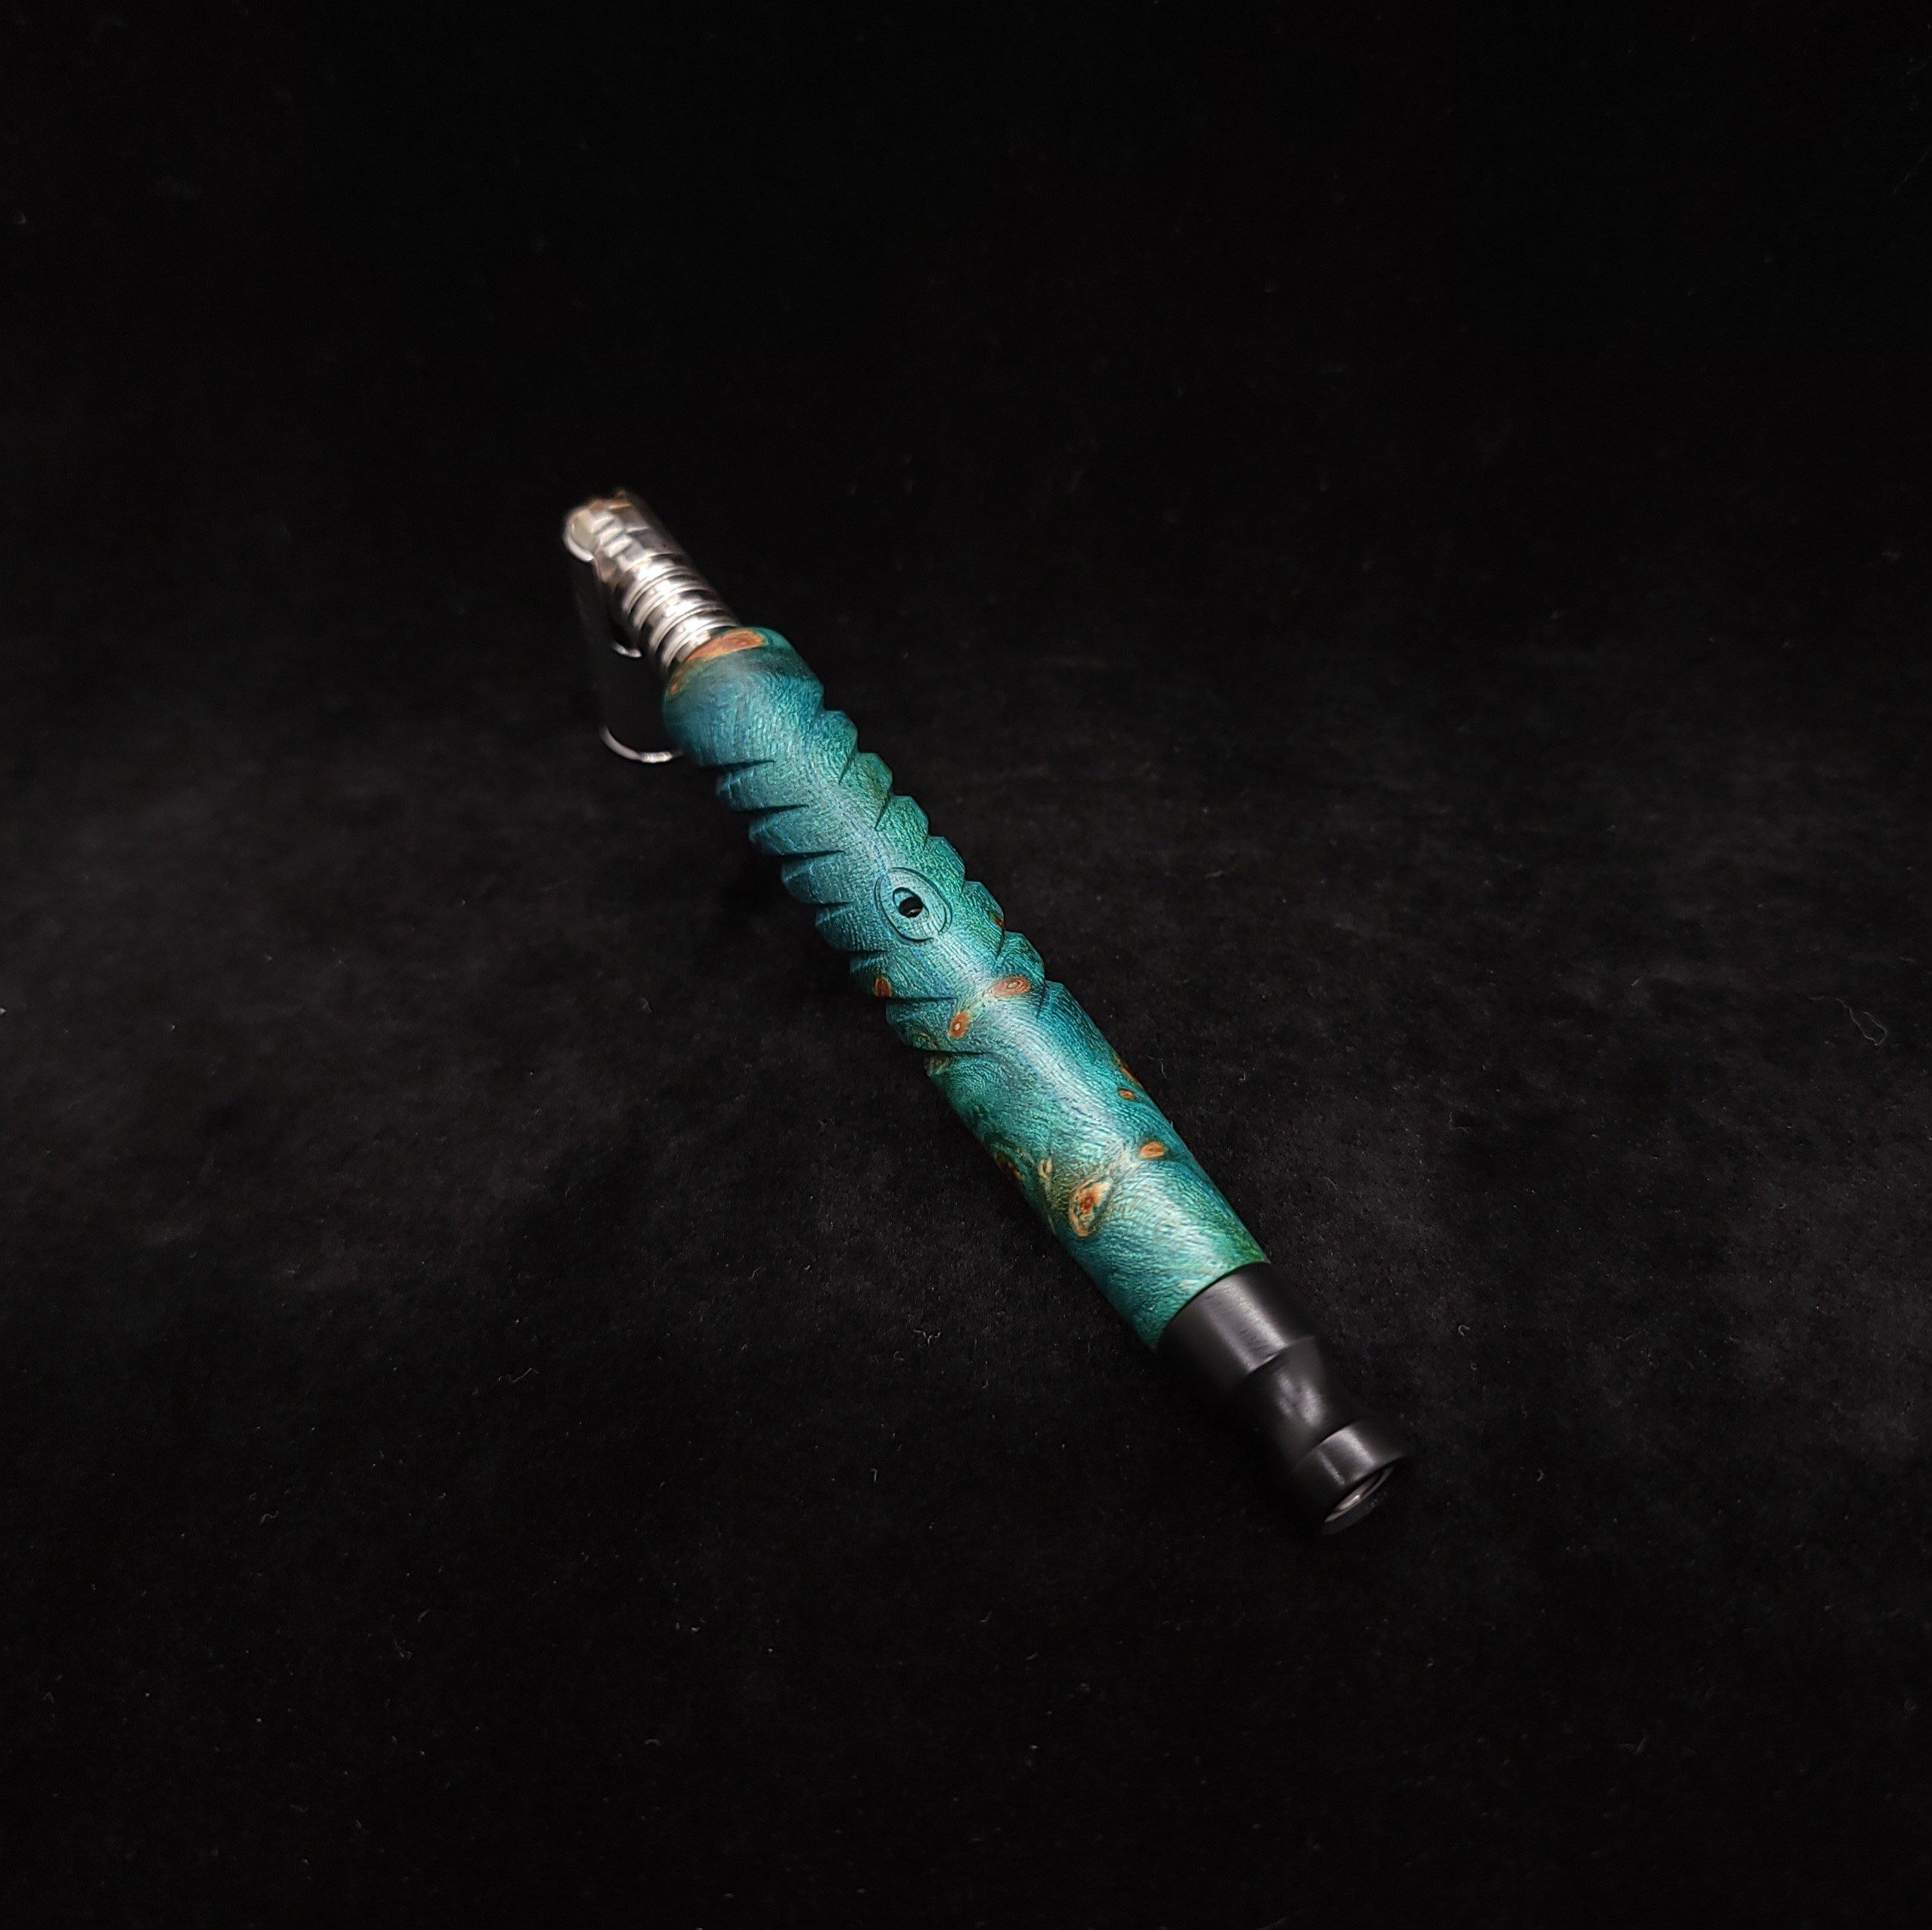 This image portrays Reaper XL Dynavap Stem/Burl Wood+Black Mouthpiece by Dovetail Woodwork.